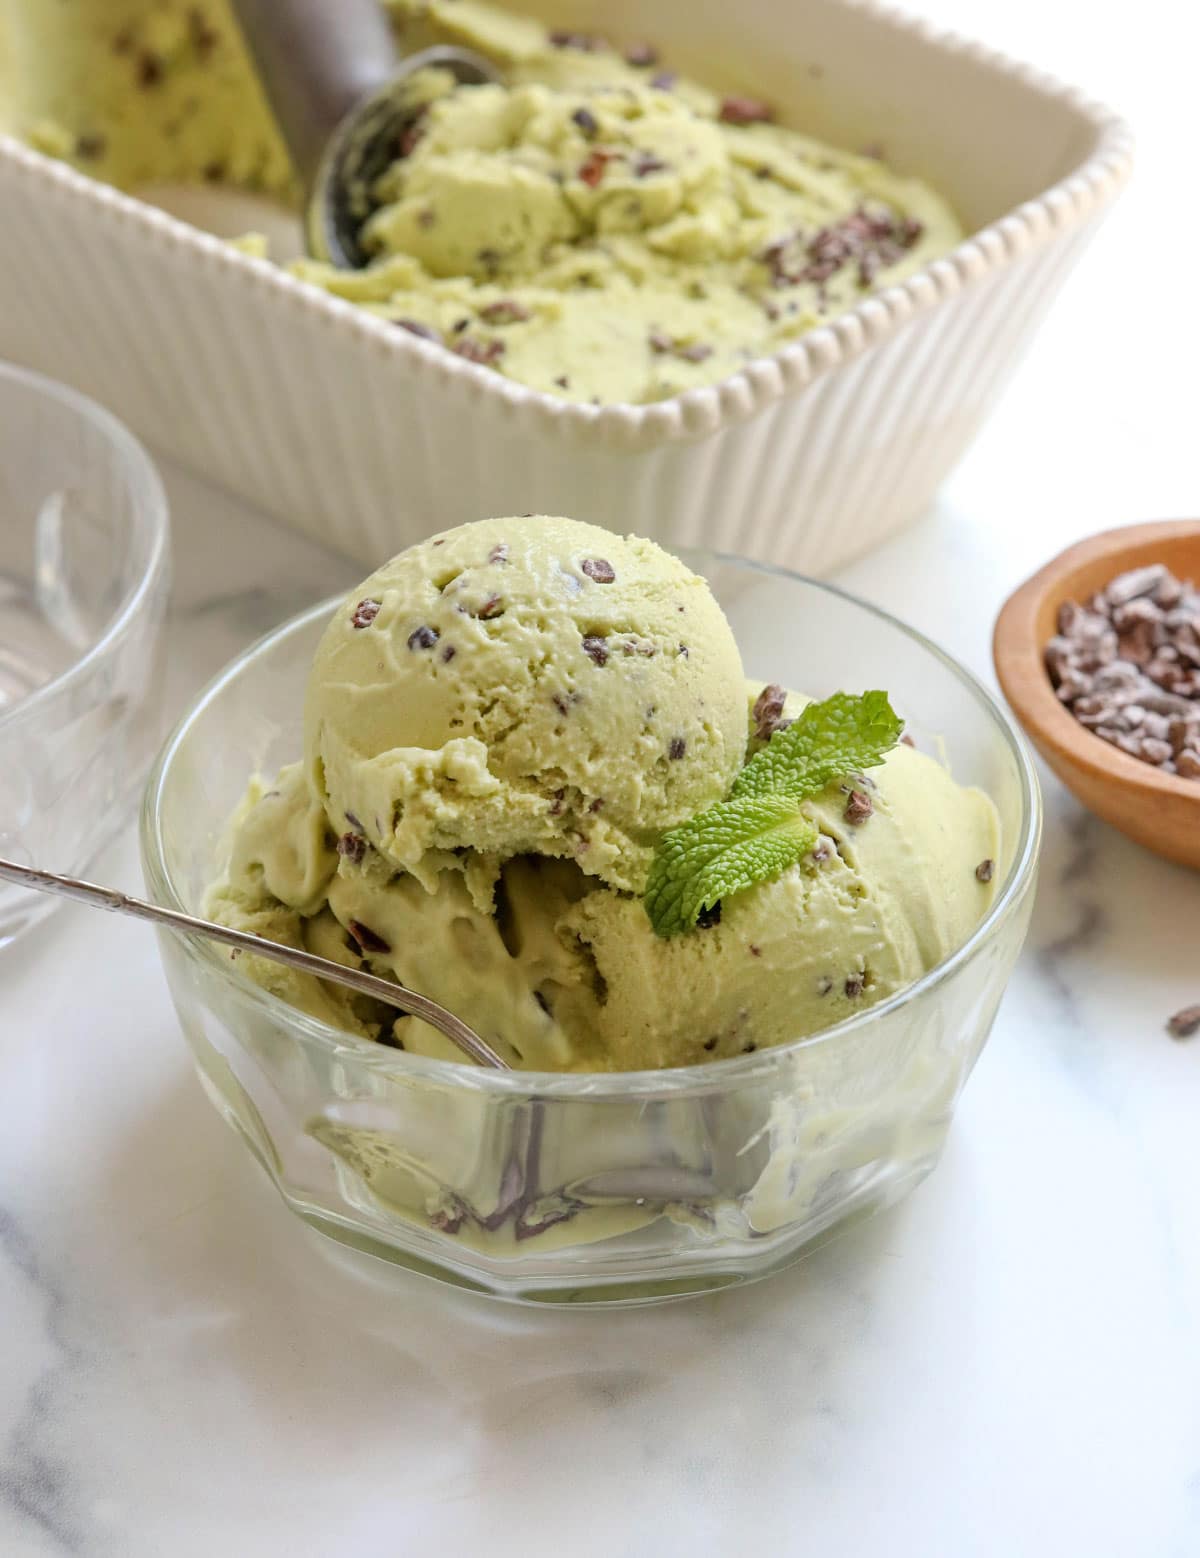 avocado ice cream served with mint leaves